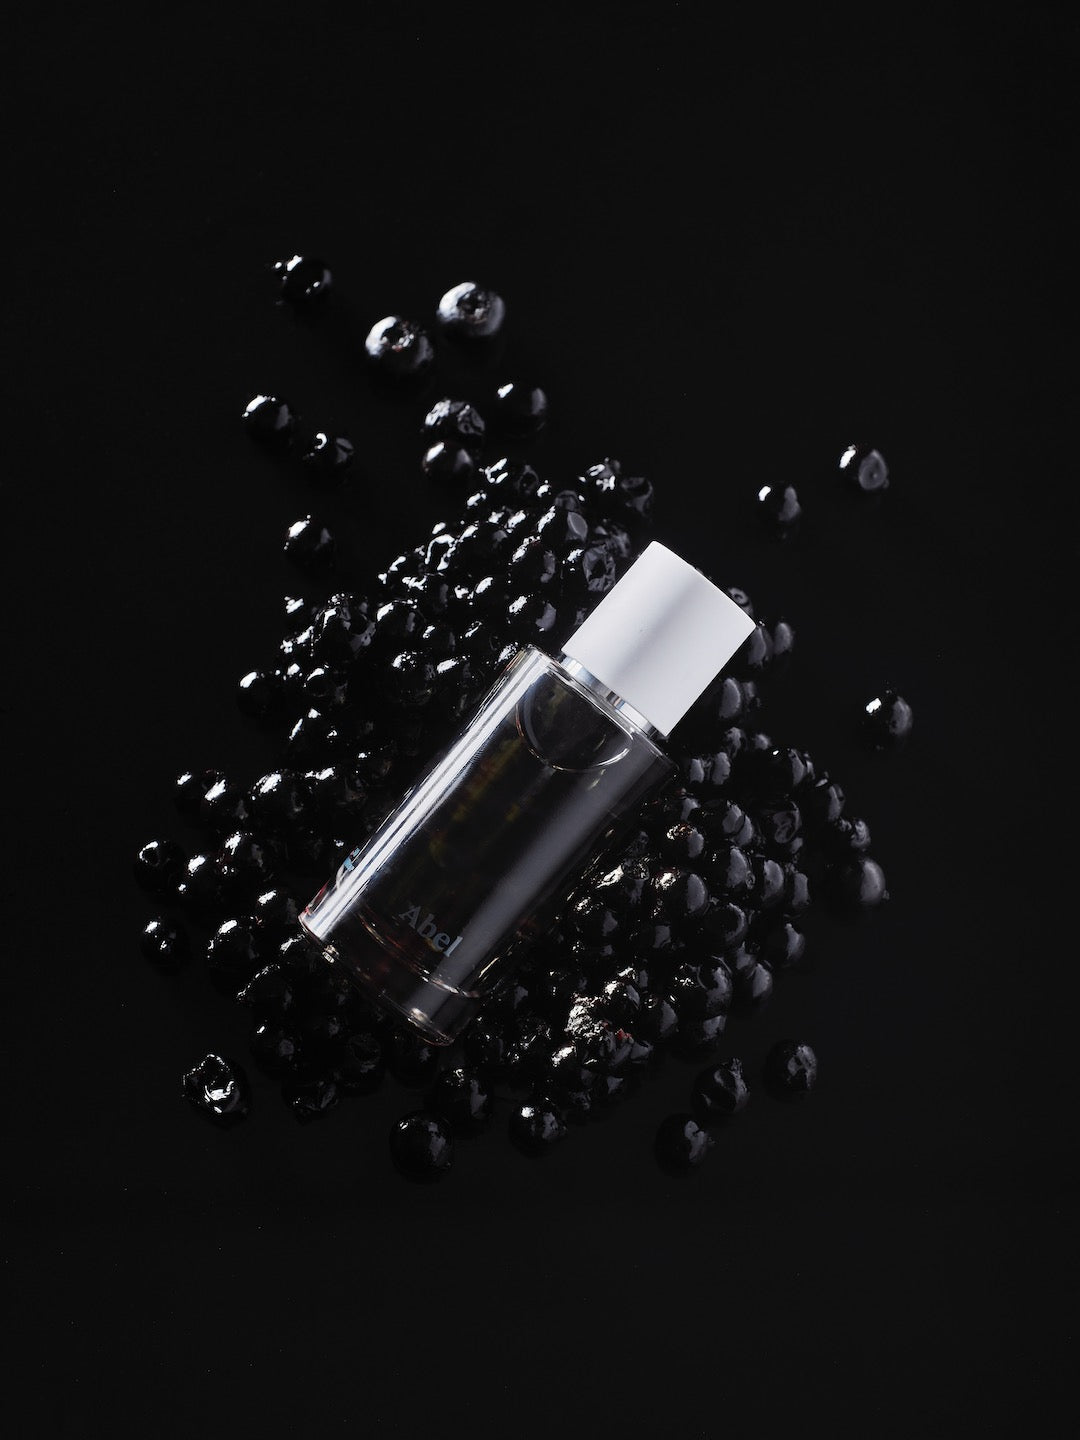 A bottle of Black Anise oil by Abel on a smoky black background.